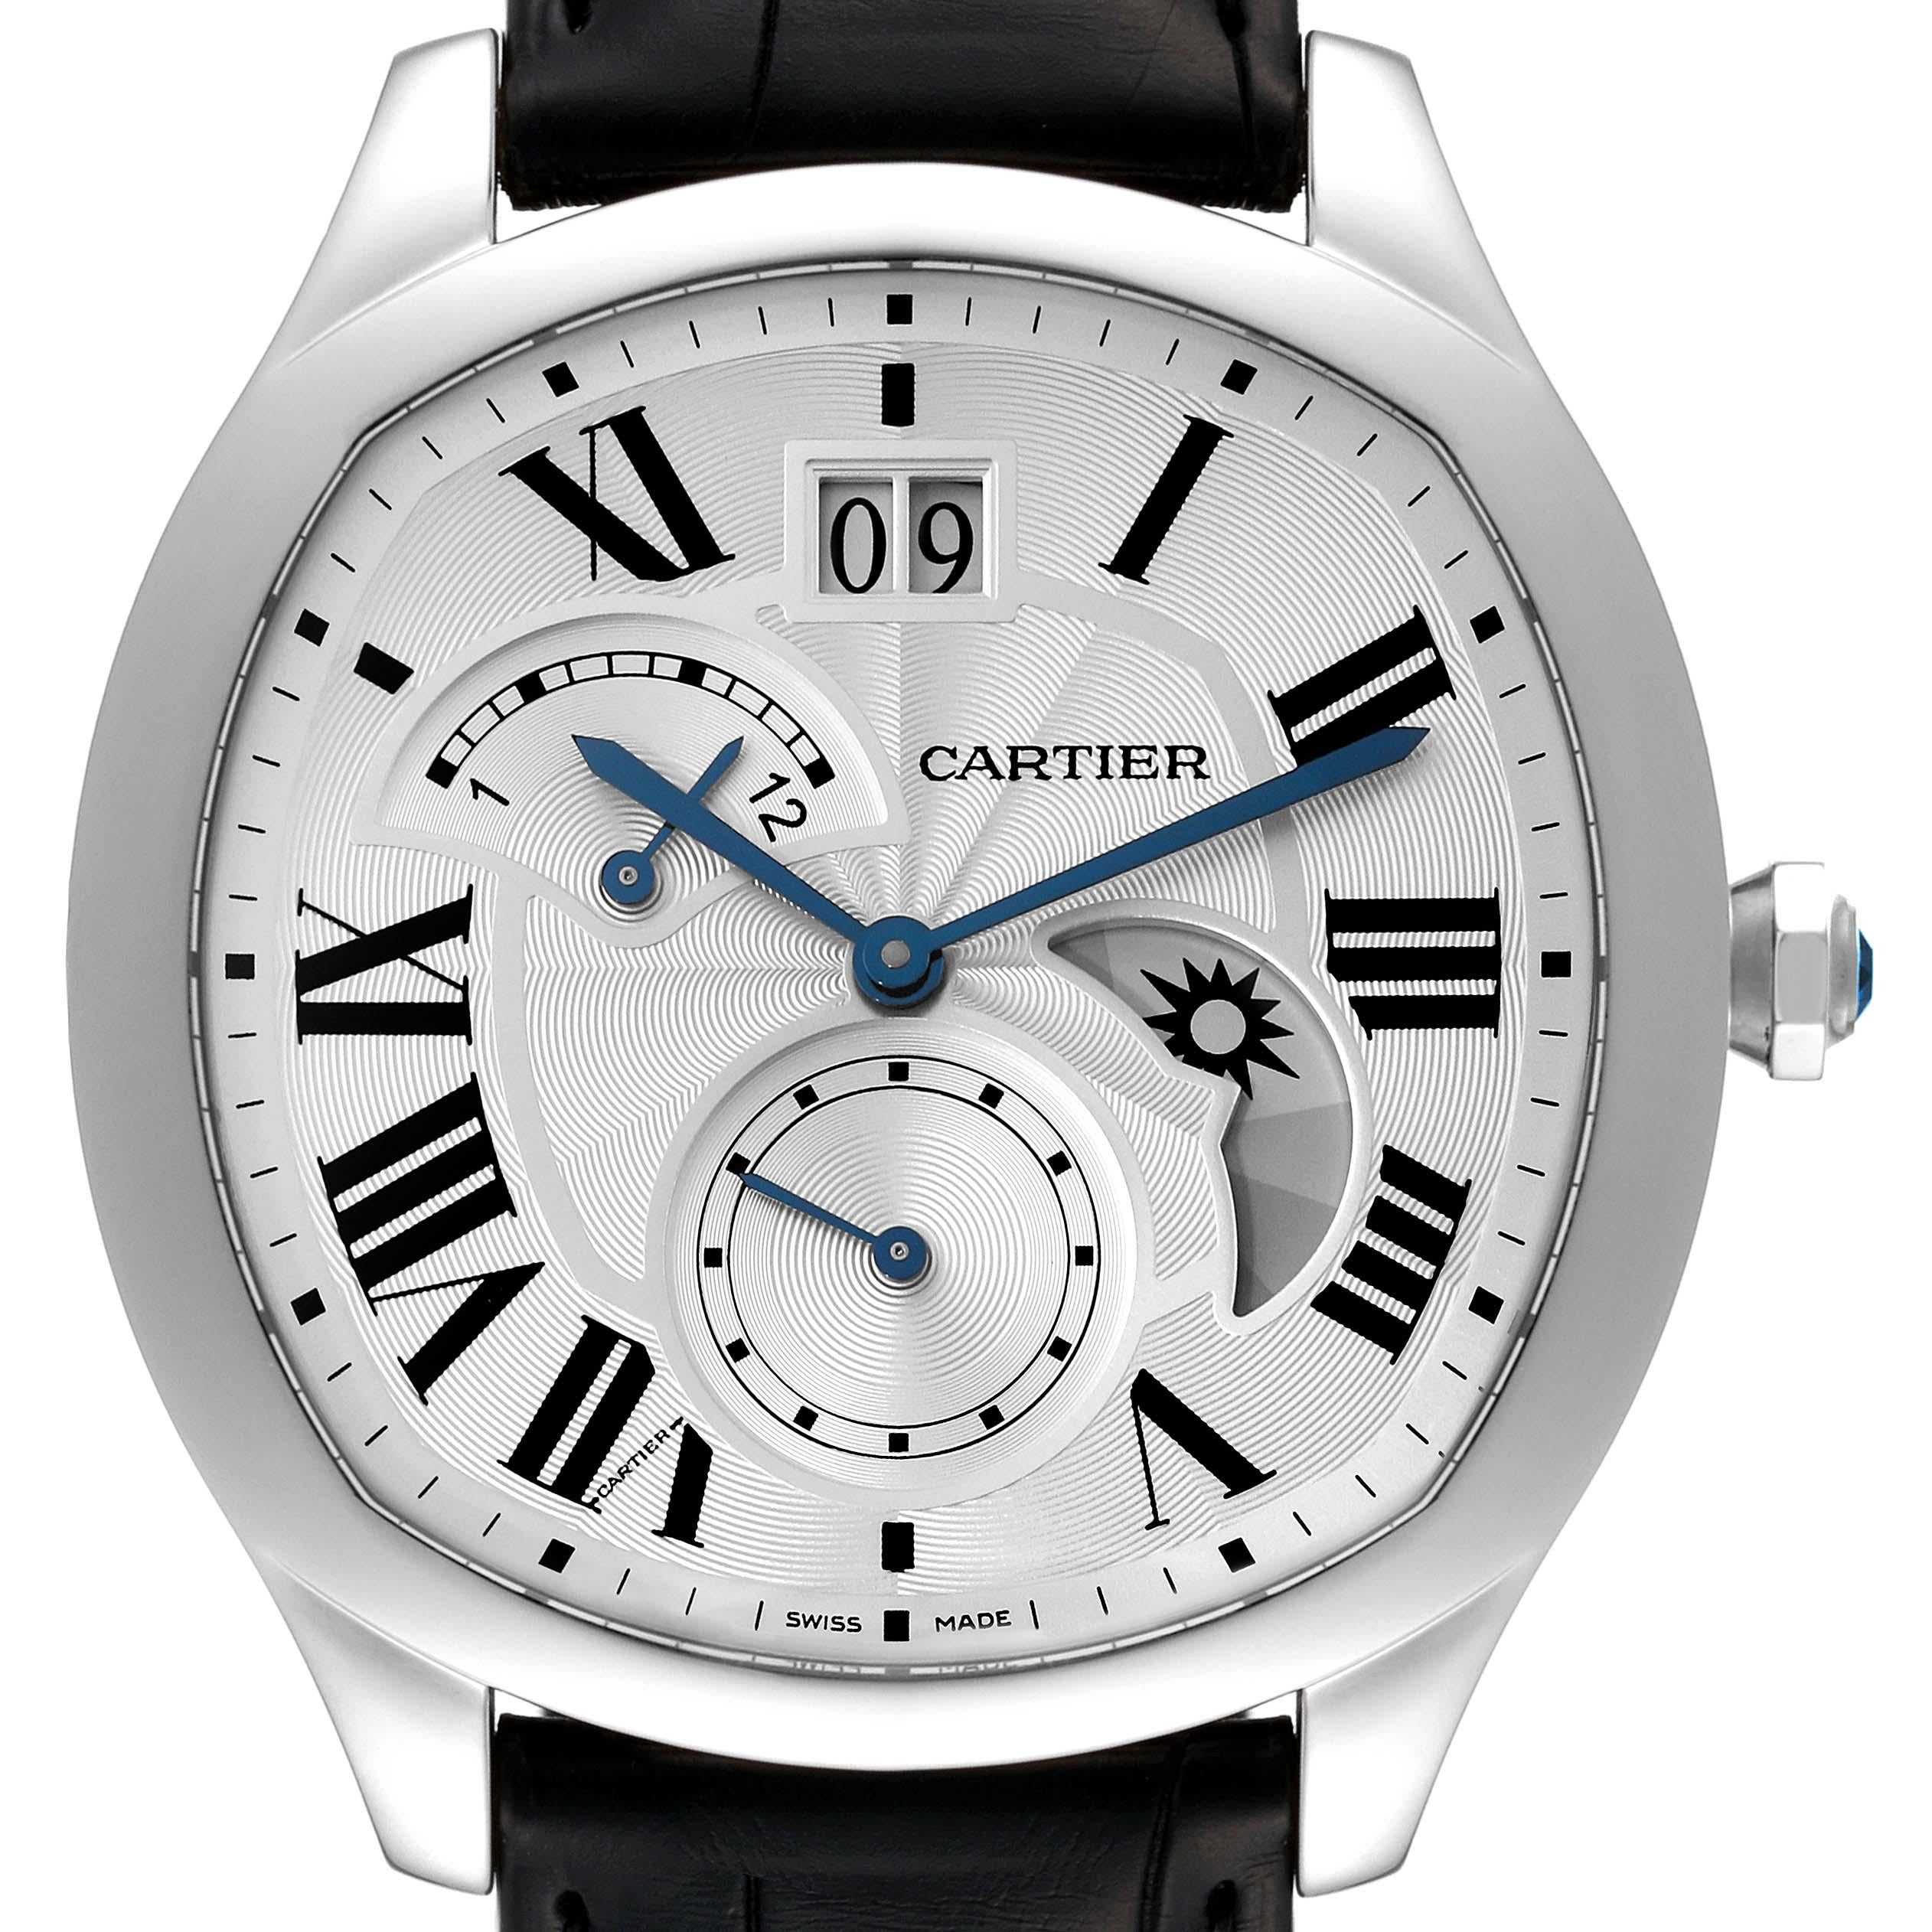 Cartier Drive Retrograde Large Day Night Indicator Steel Mens Watch WSNM0005 Box Papers. Automatic self-winding movement. Cushion-shaped stainless steel case 40.0 mm in diameter. Octagonal crown set with a faceted blue spinel cabochon. Exhibition